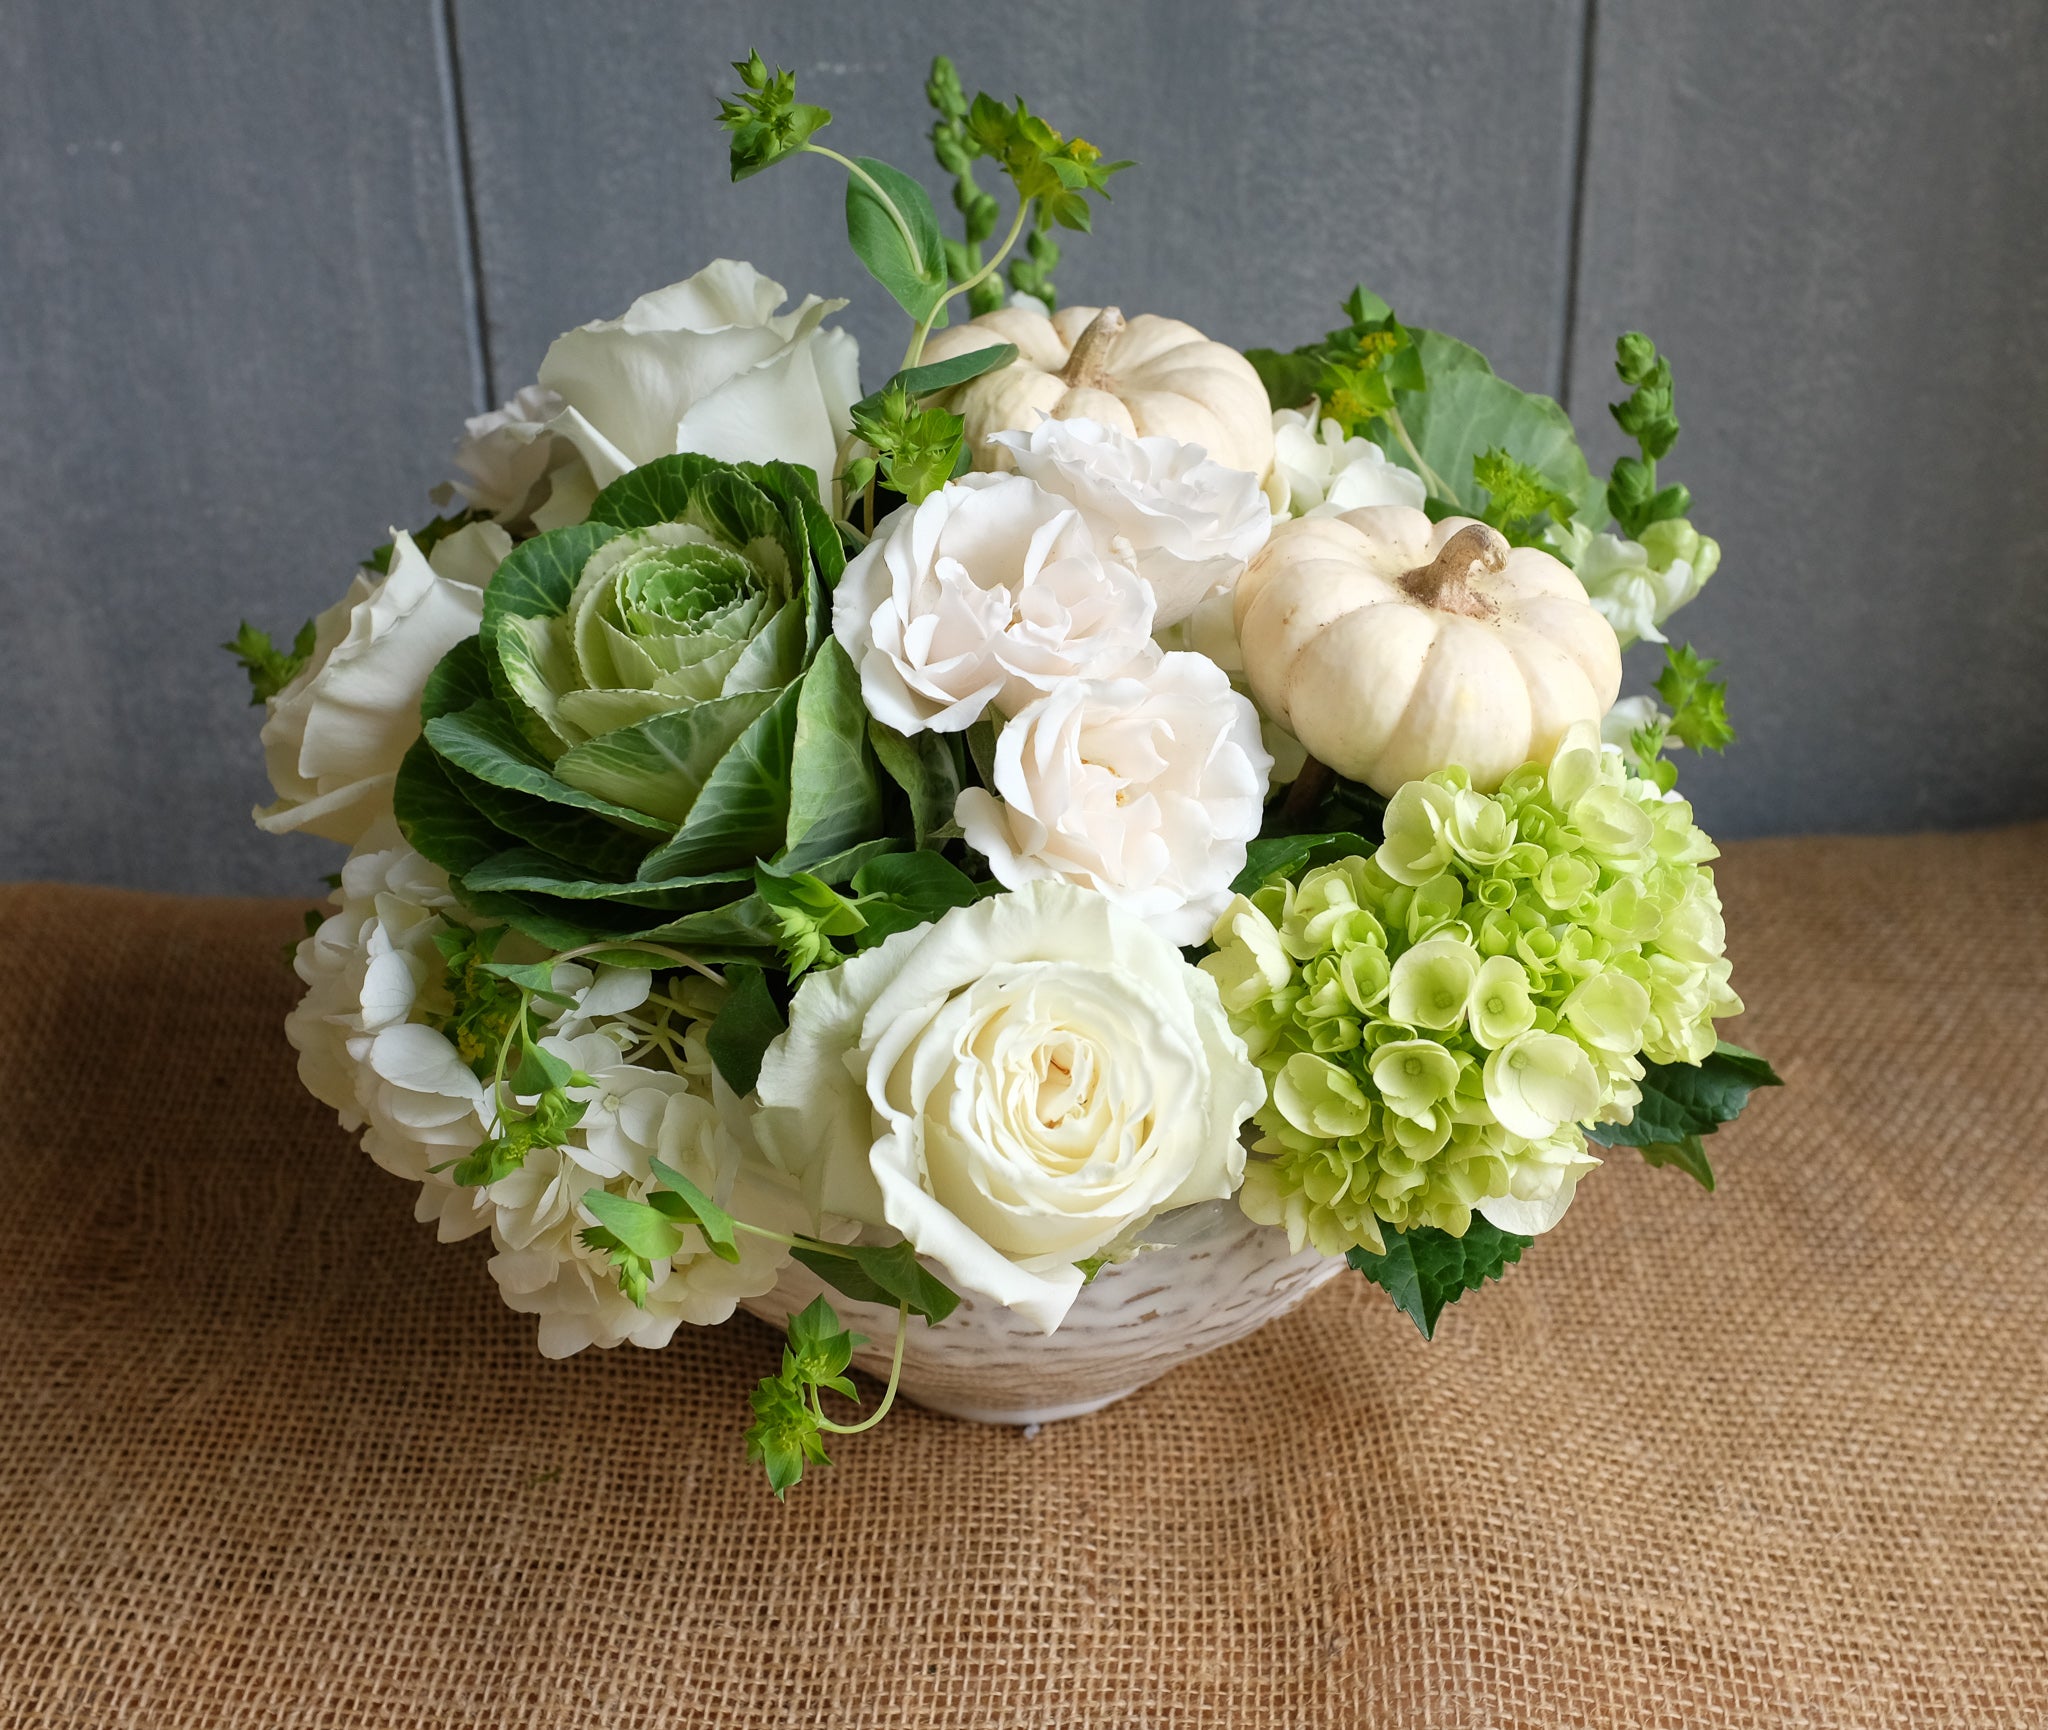 Contemporary Floral Bouquet in tones of white and green with seasonal elements